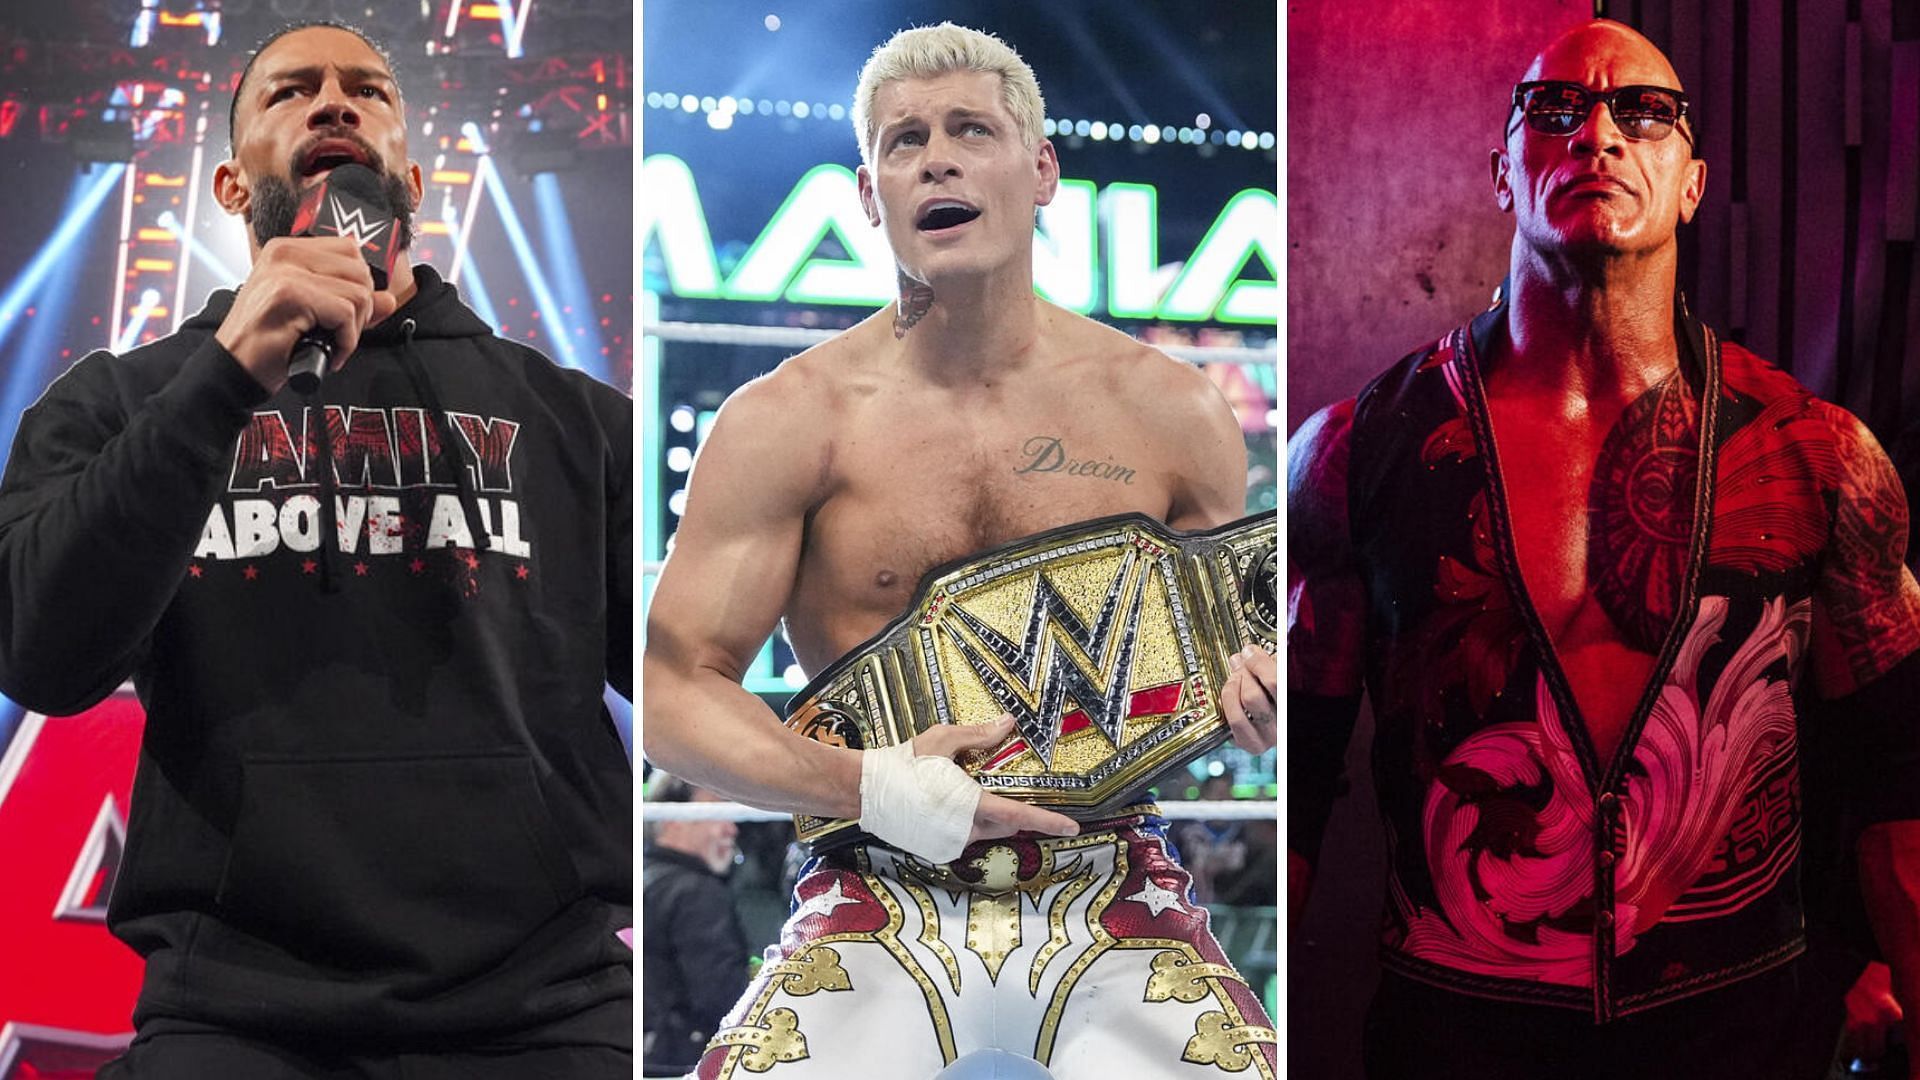 Cody Rhodes will have to deal with The Rock and Roman Reigns in the future